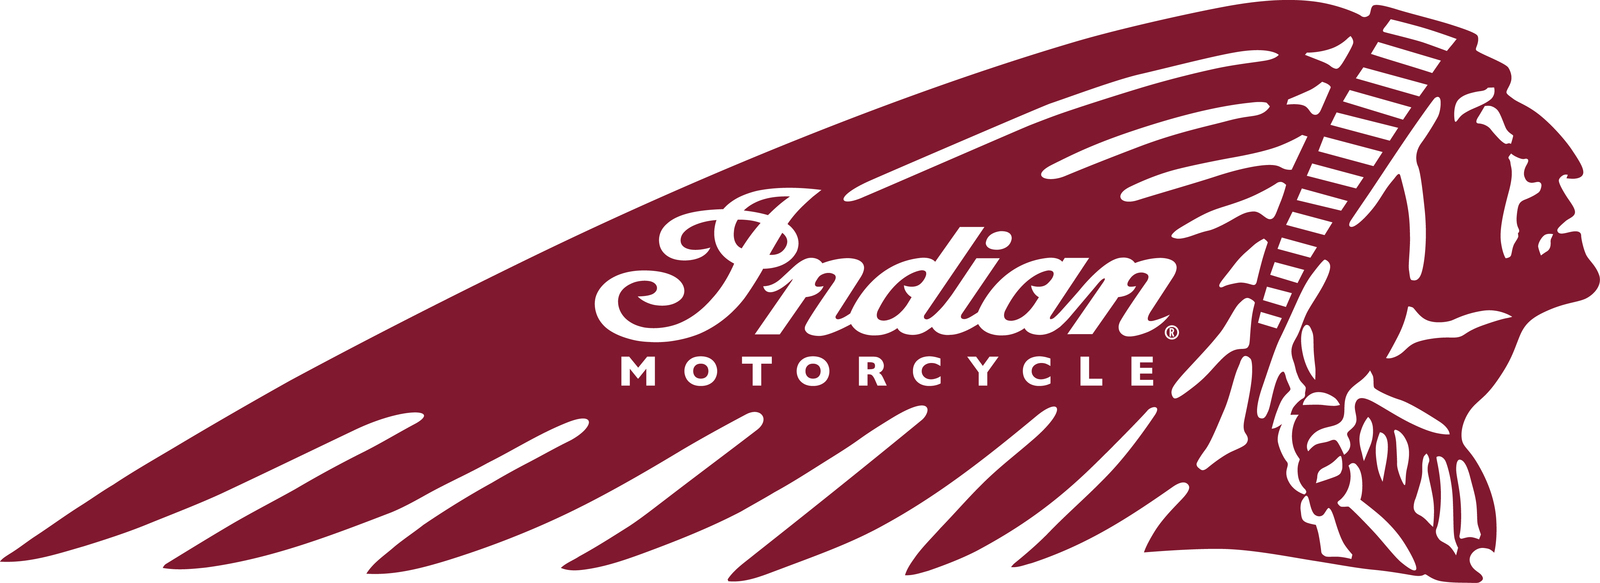 Freedom Indian Motorcycle Of Mckinney Texas Opens Doors To Local